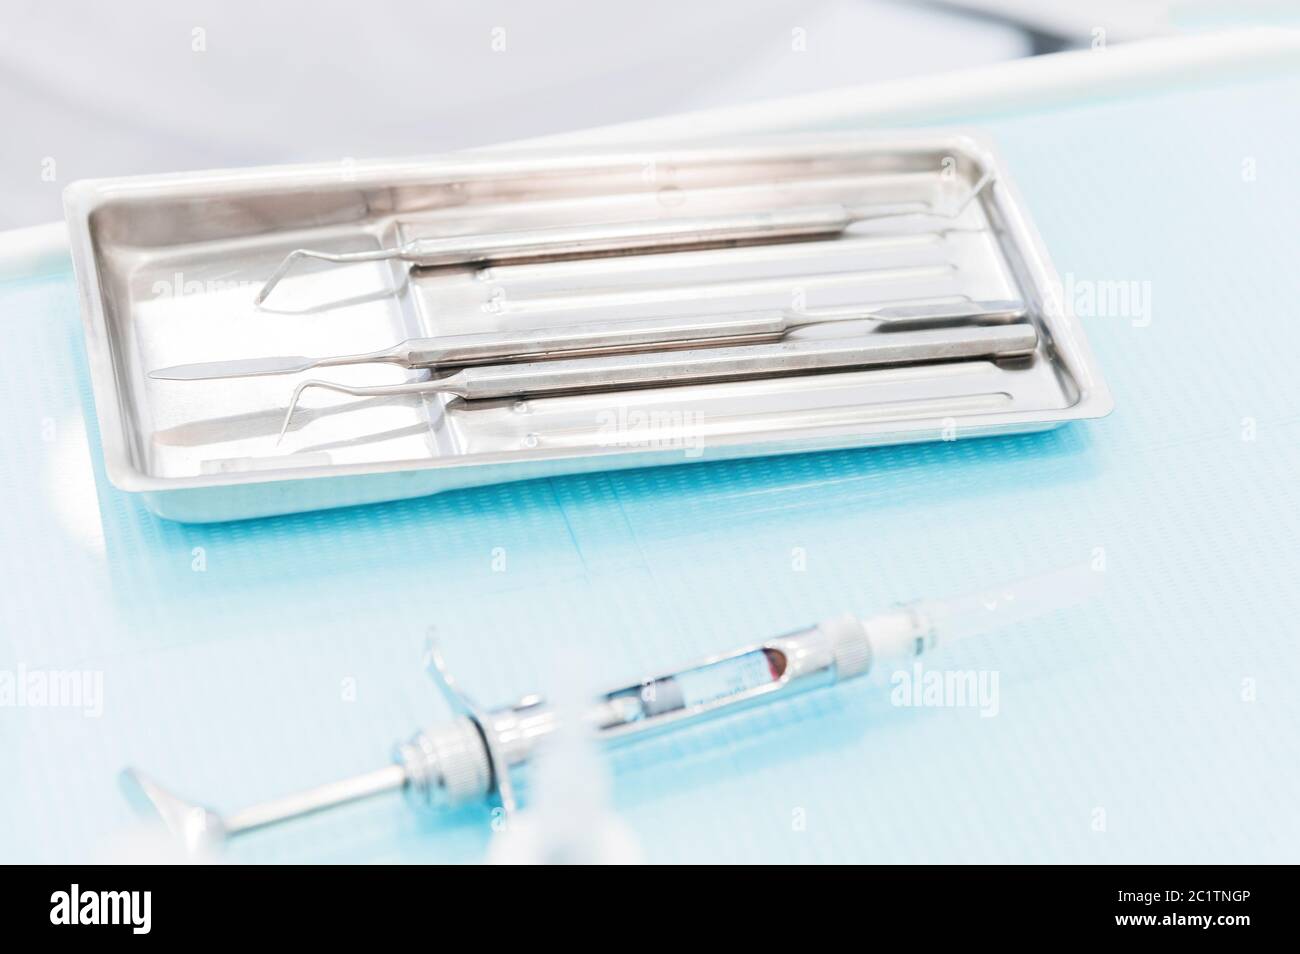 Close-up of a staminological instrument next to a metal syringe. Dental equipment. Dental hygiene and healthcare concept Stock Photo